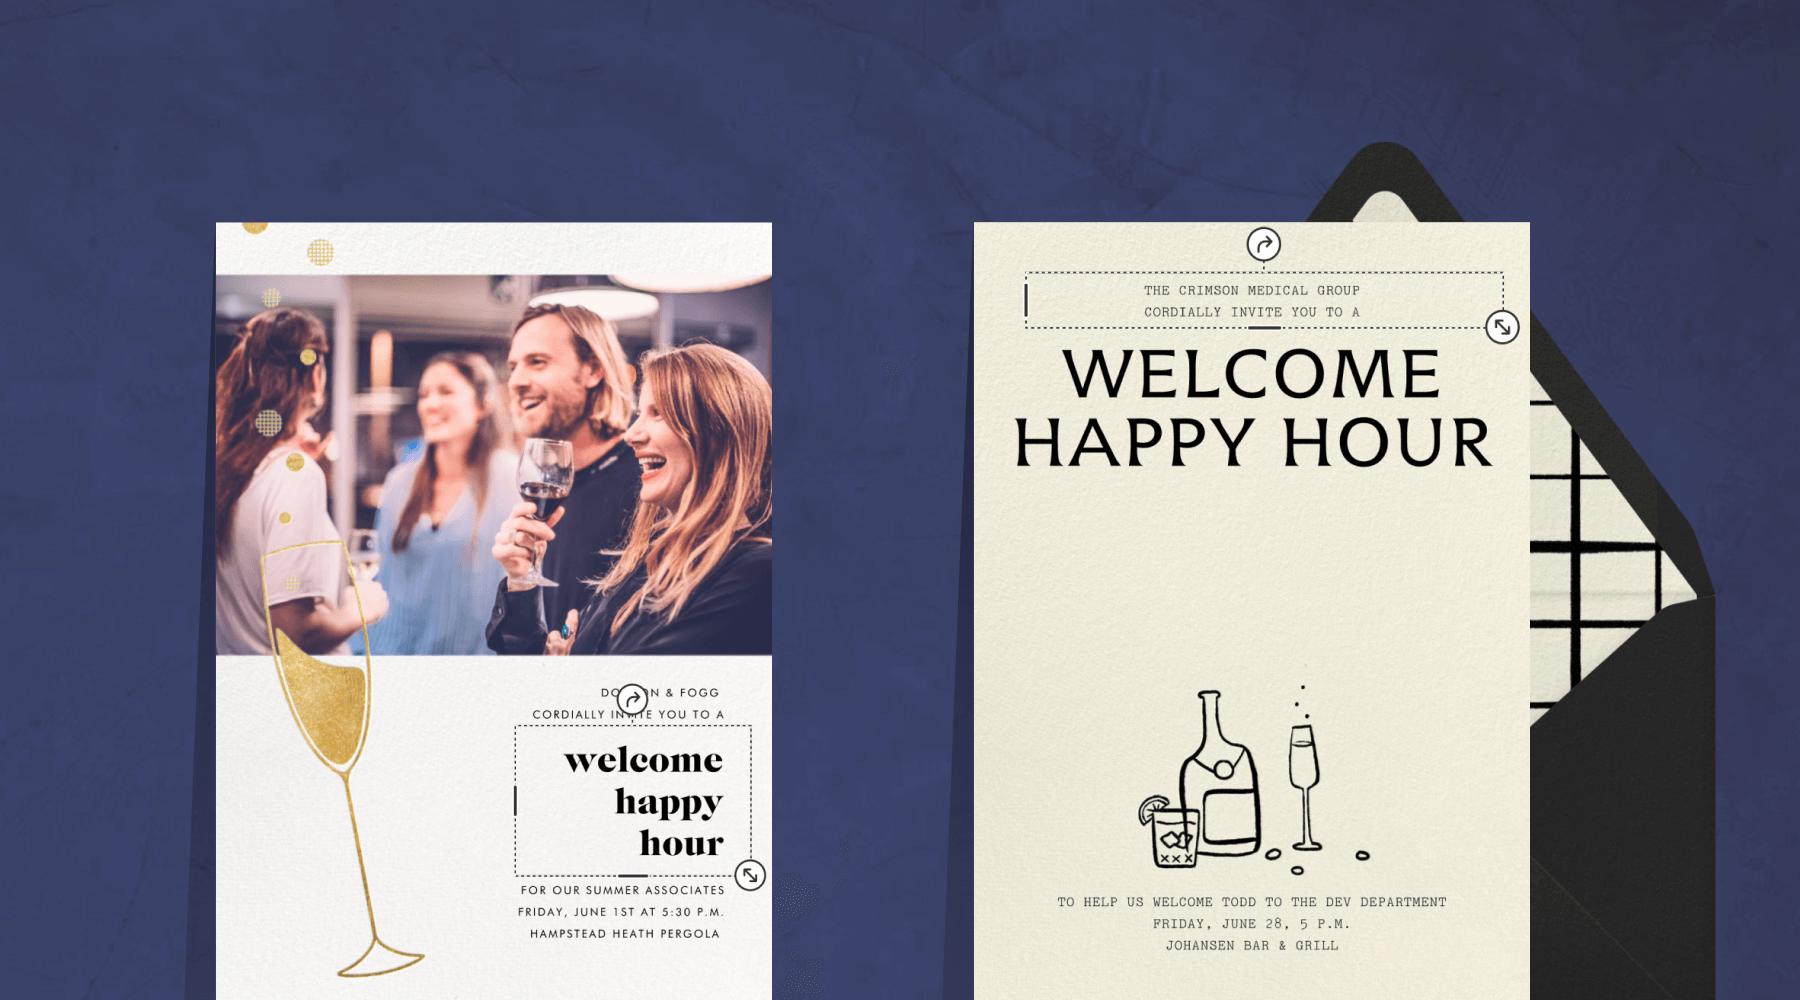 An invitation with a photo of men and women holding wine glasses and a gold foil Champagne flute in the foreground; an invitation for WELCOME HAPPY HOUR with a small doodle of a liquor bottle and glasses beside a black envelope with grid liner.